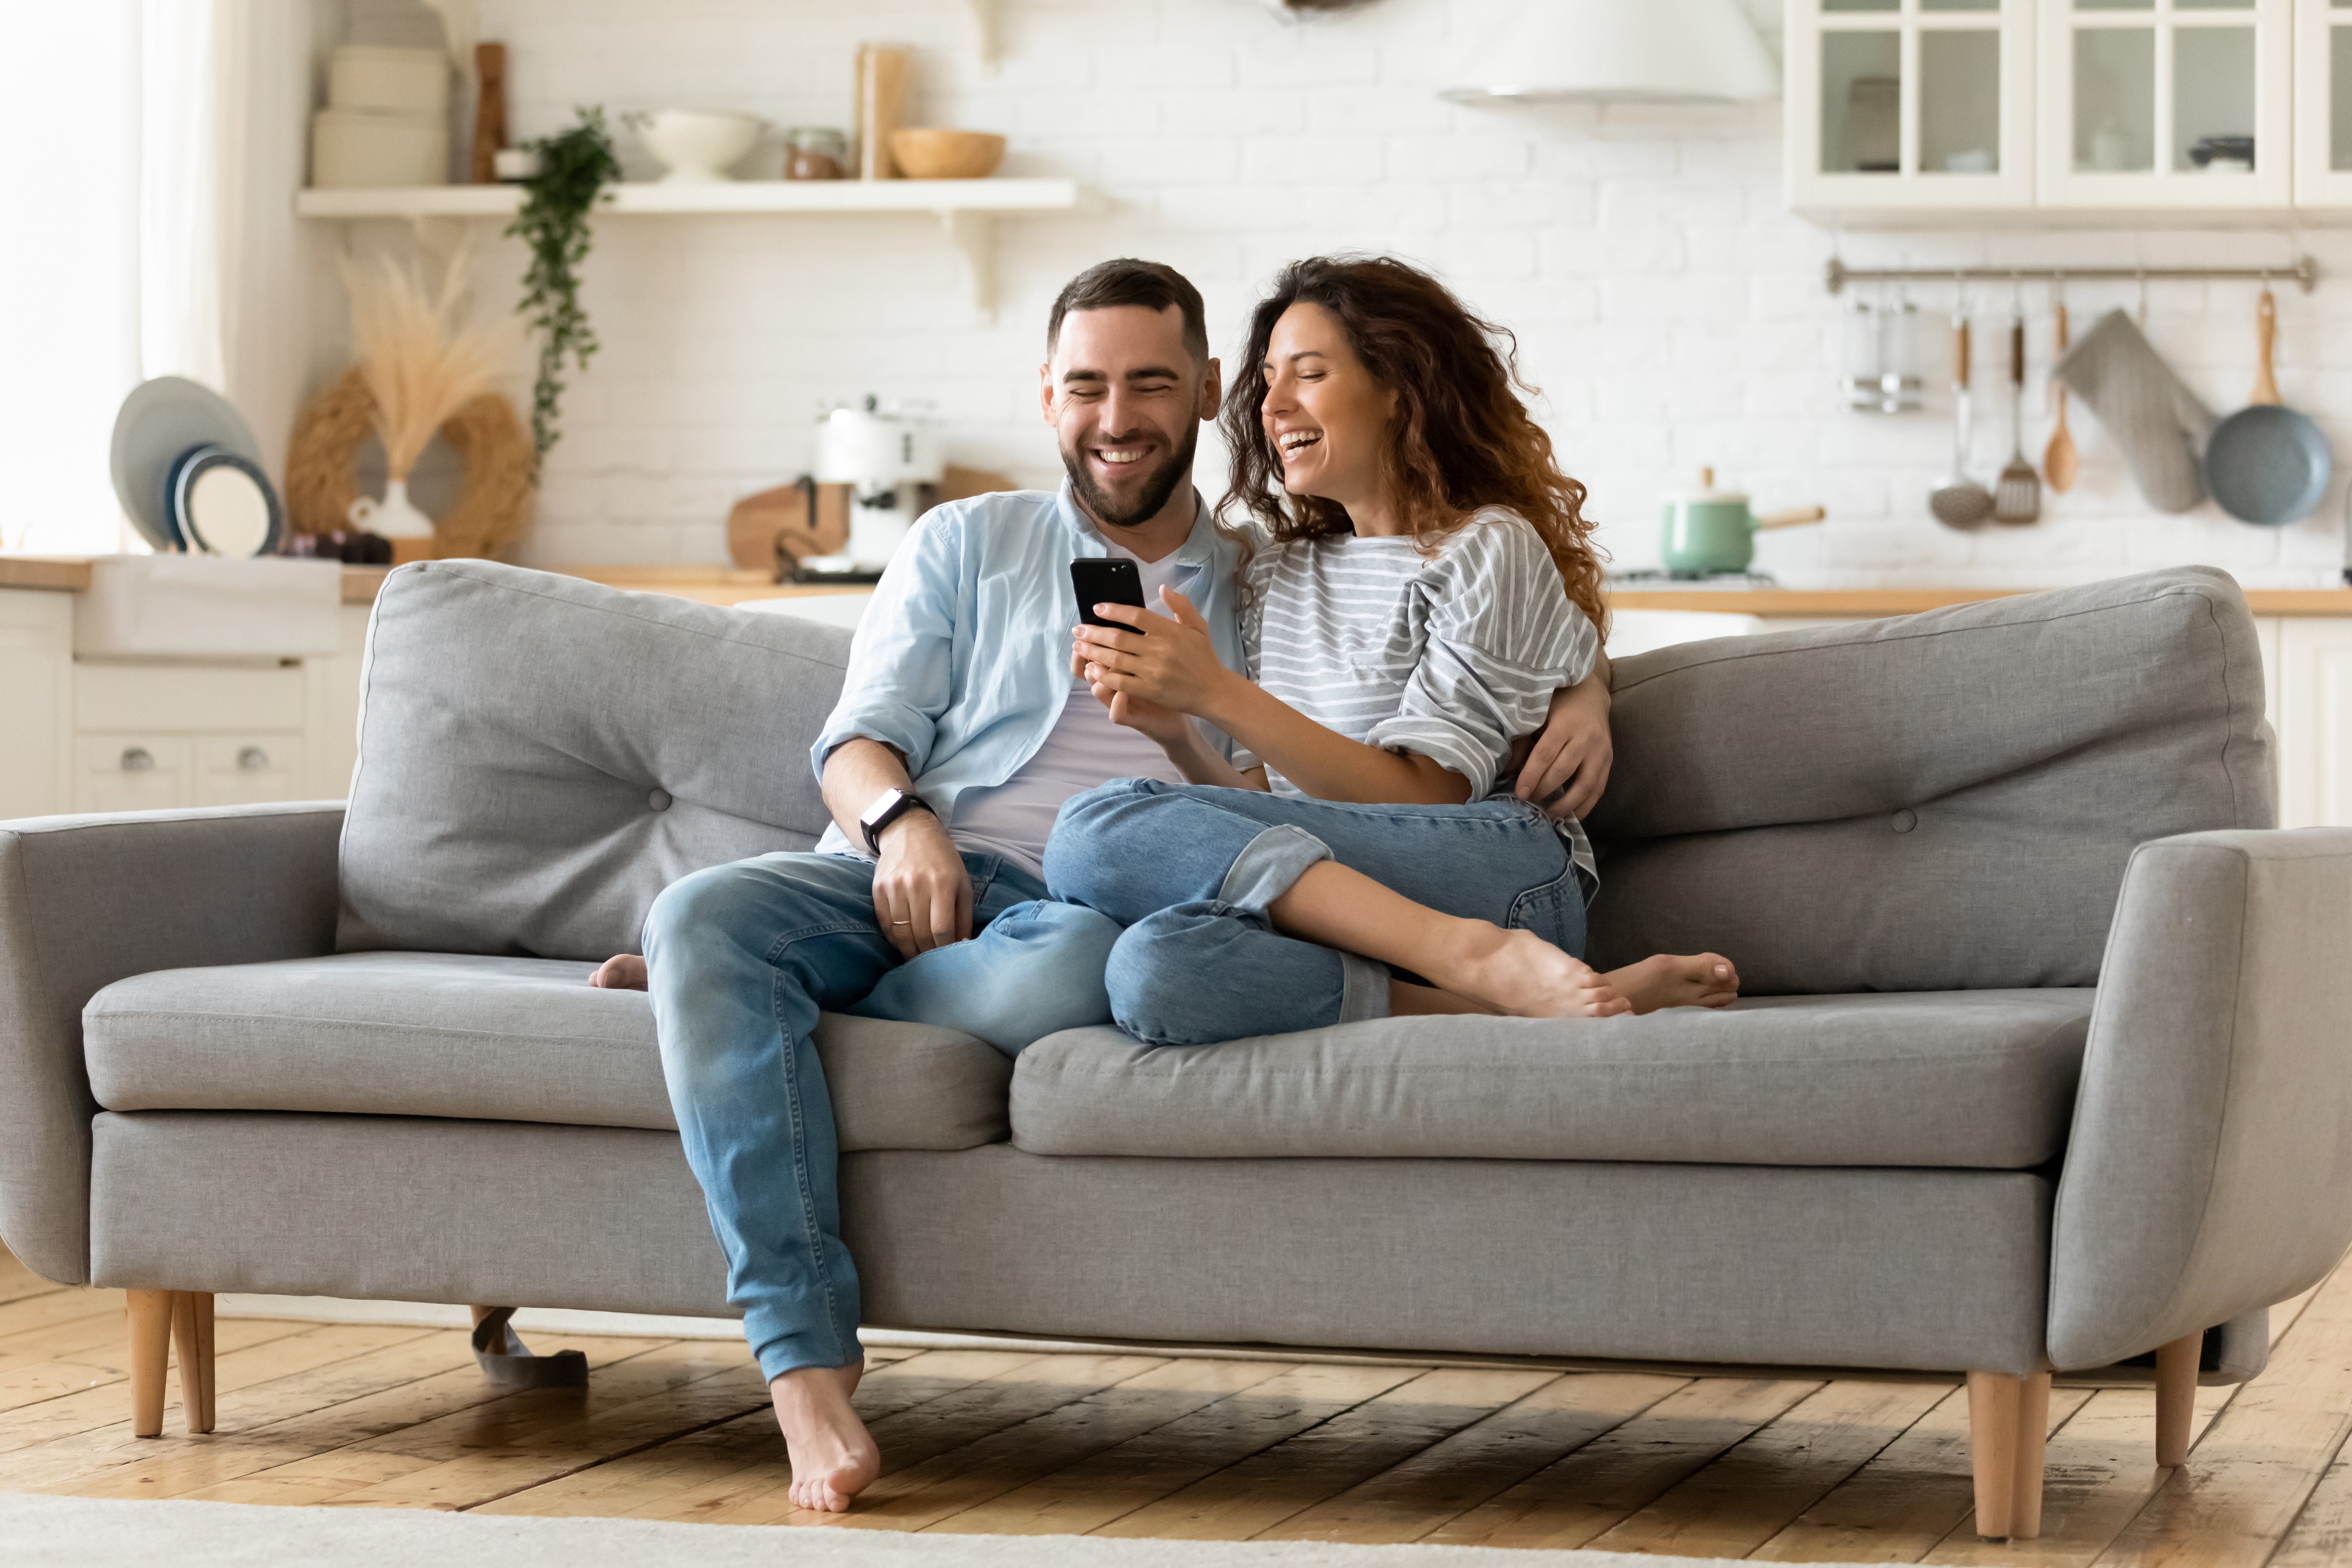 A happy couple sitting on a couch | Source: Shutterstock